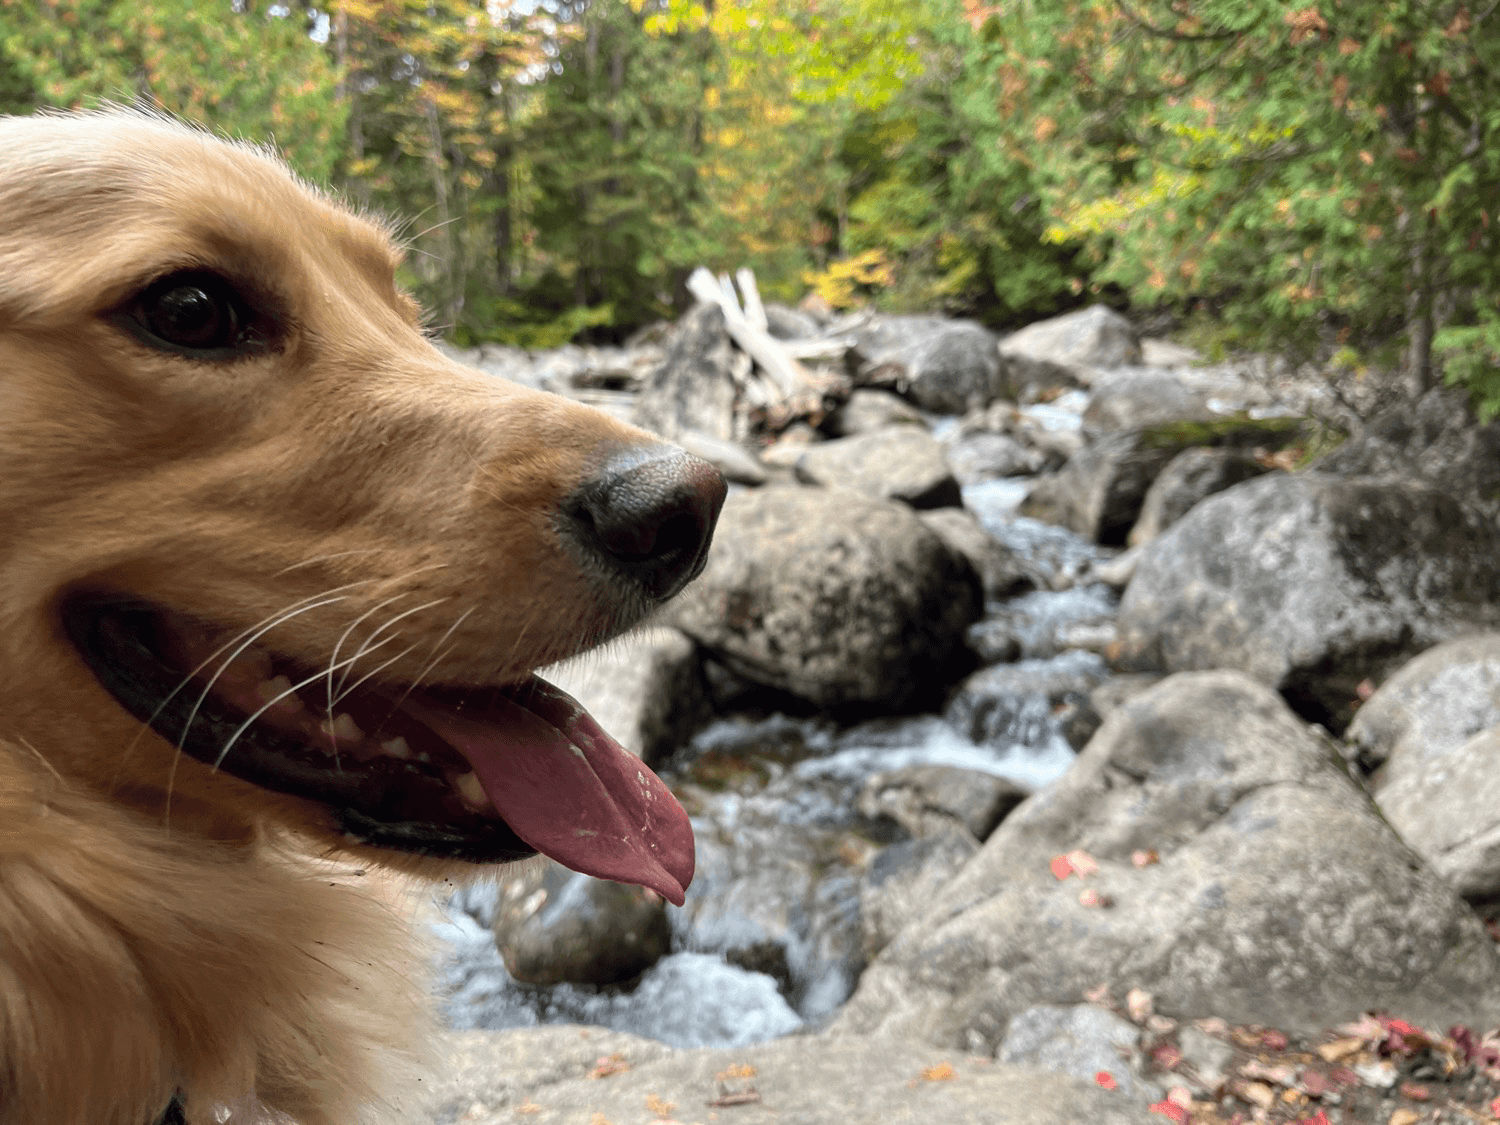 Dog with a stream in the background.